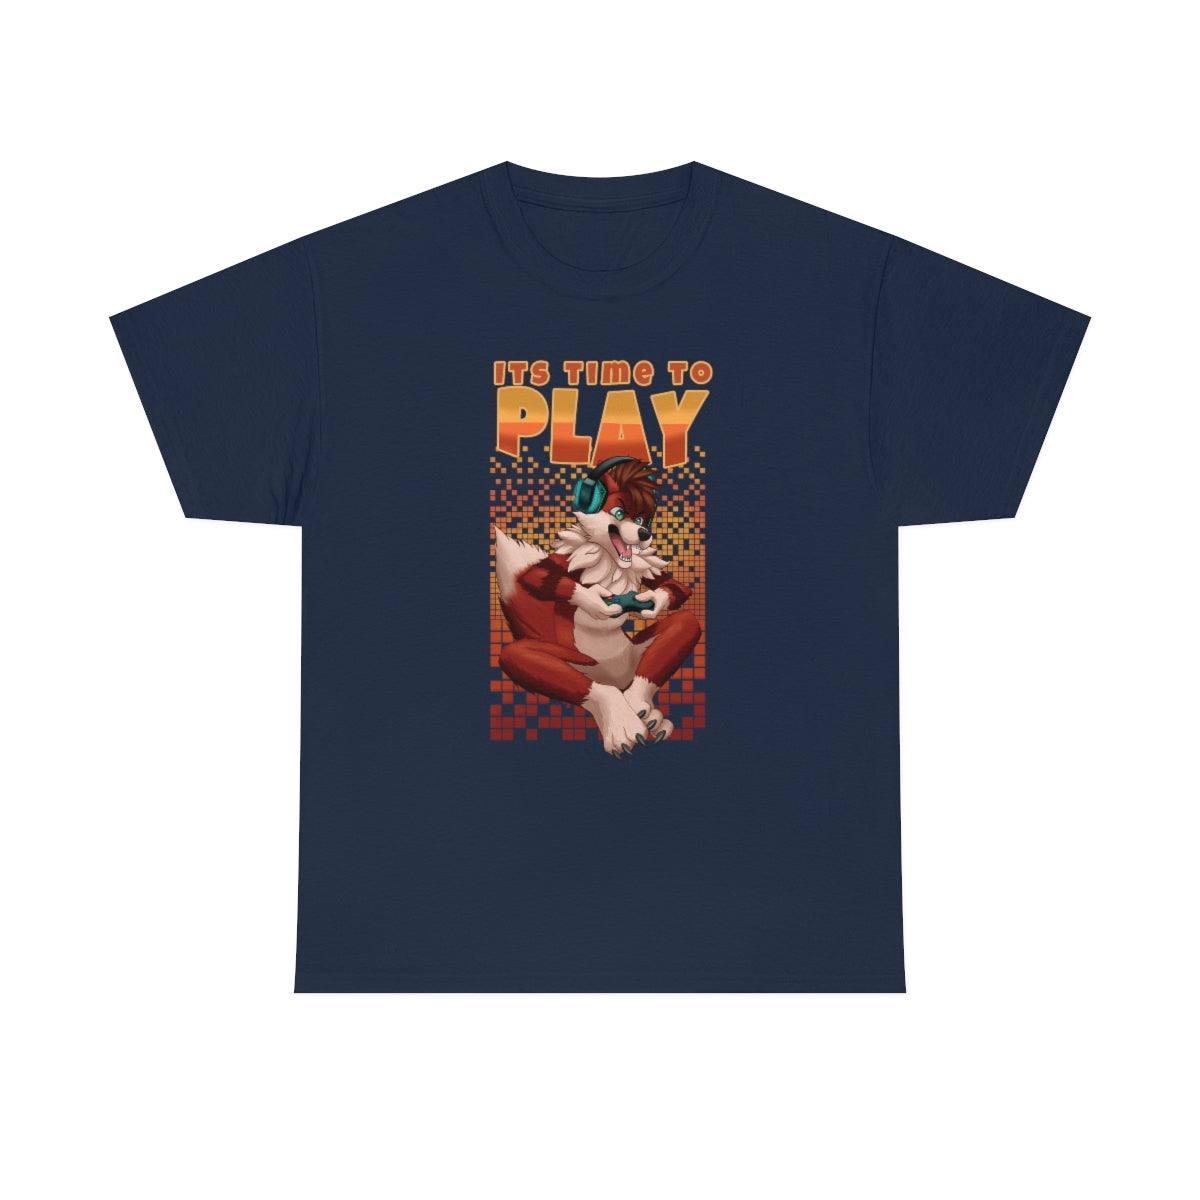 Its Time to Play - T-Shirt T-Shirt Artworktee Navy Blue S 